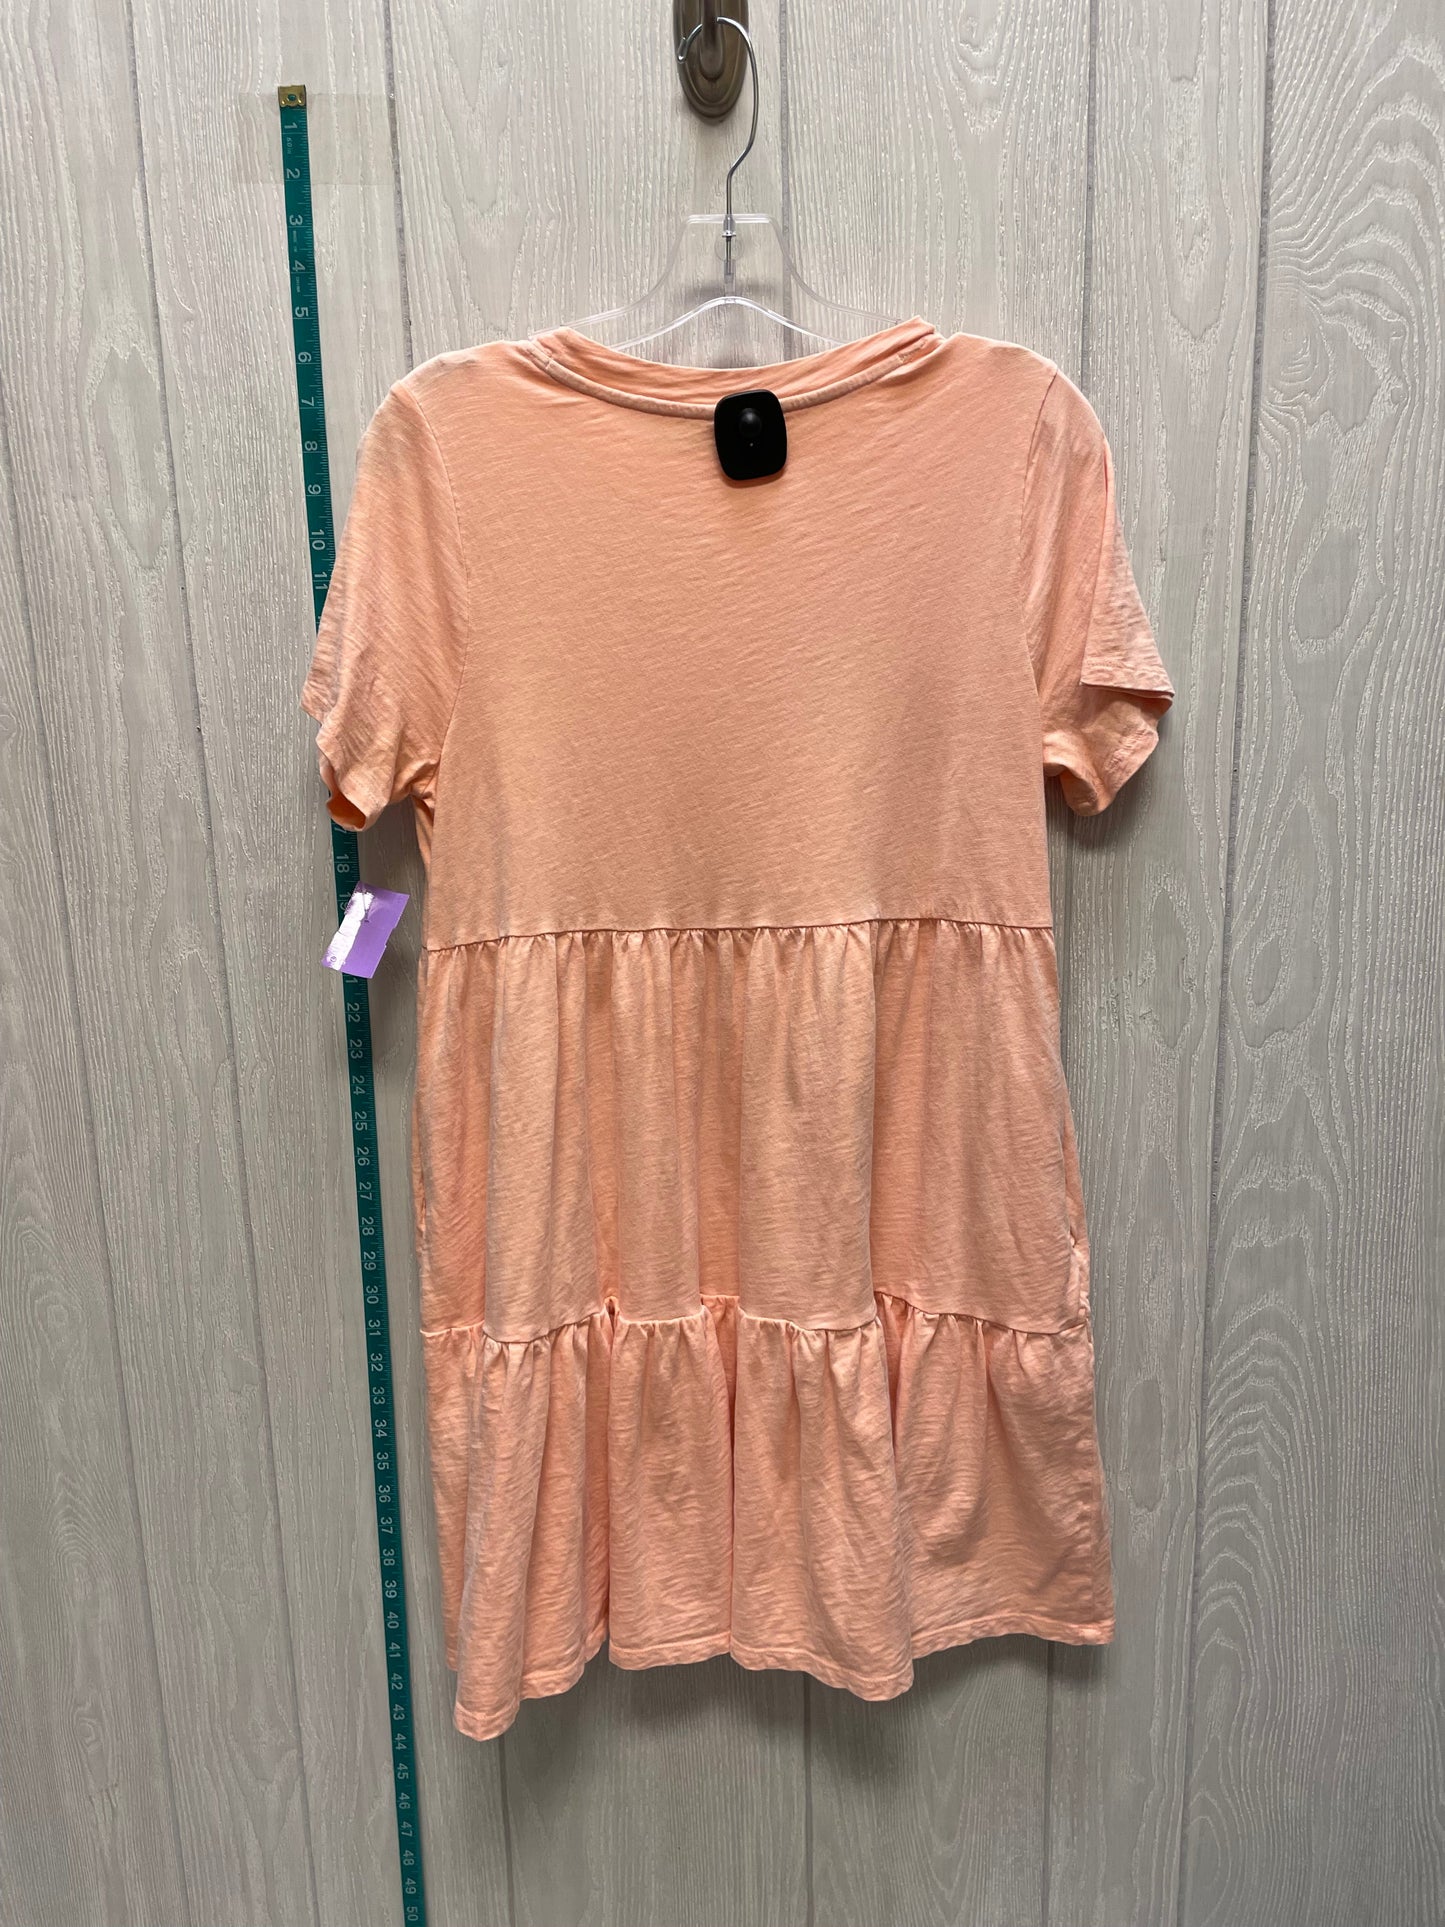 Peach Dress Casual Short Old Navy, Size M